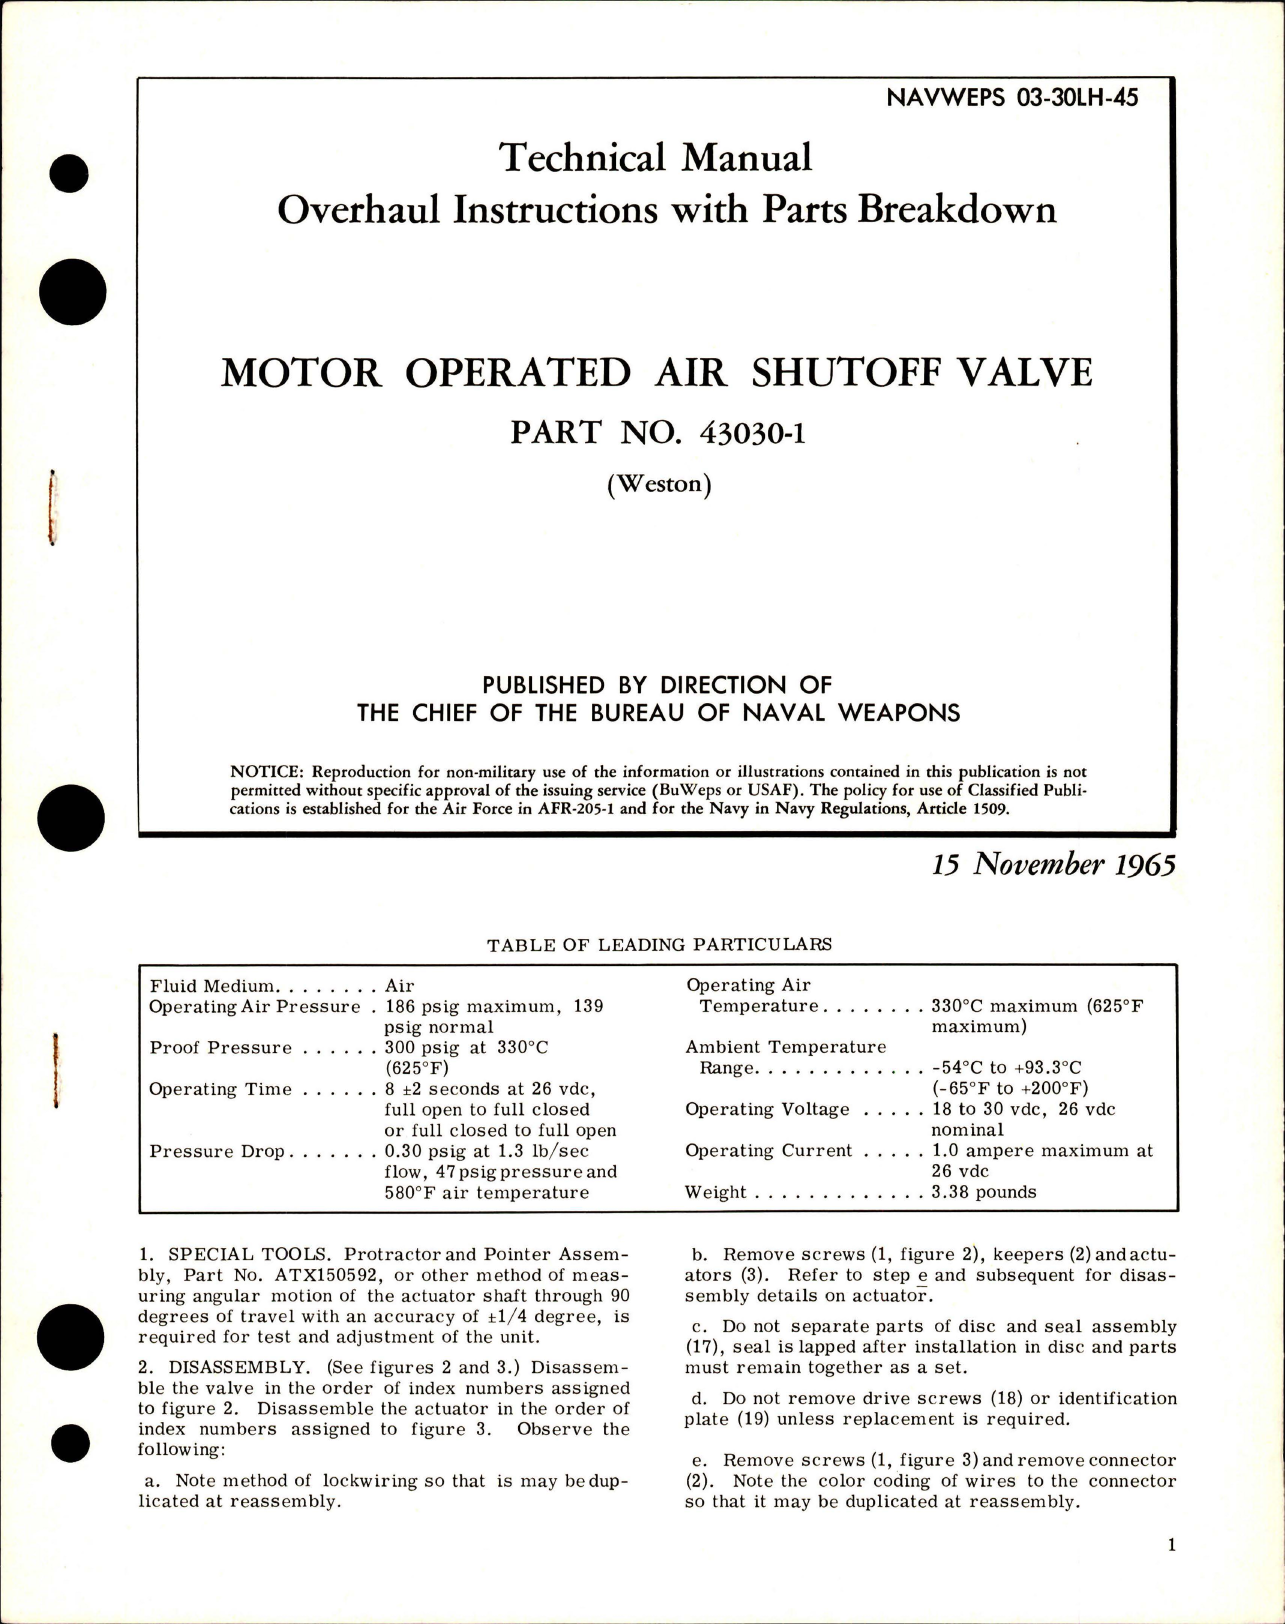 Sample page 1 from AirCorps Library document: Overhaul Instructions with Parts Breakdown for Motor Operated Air Shutoff Valve - Part 43030-1